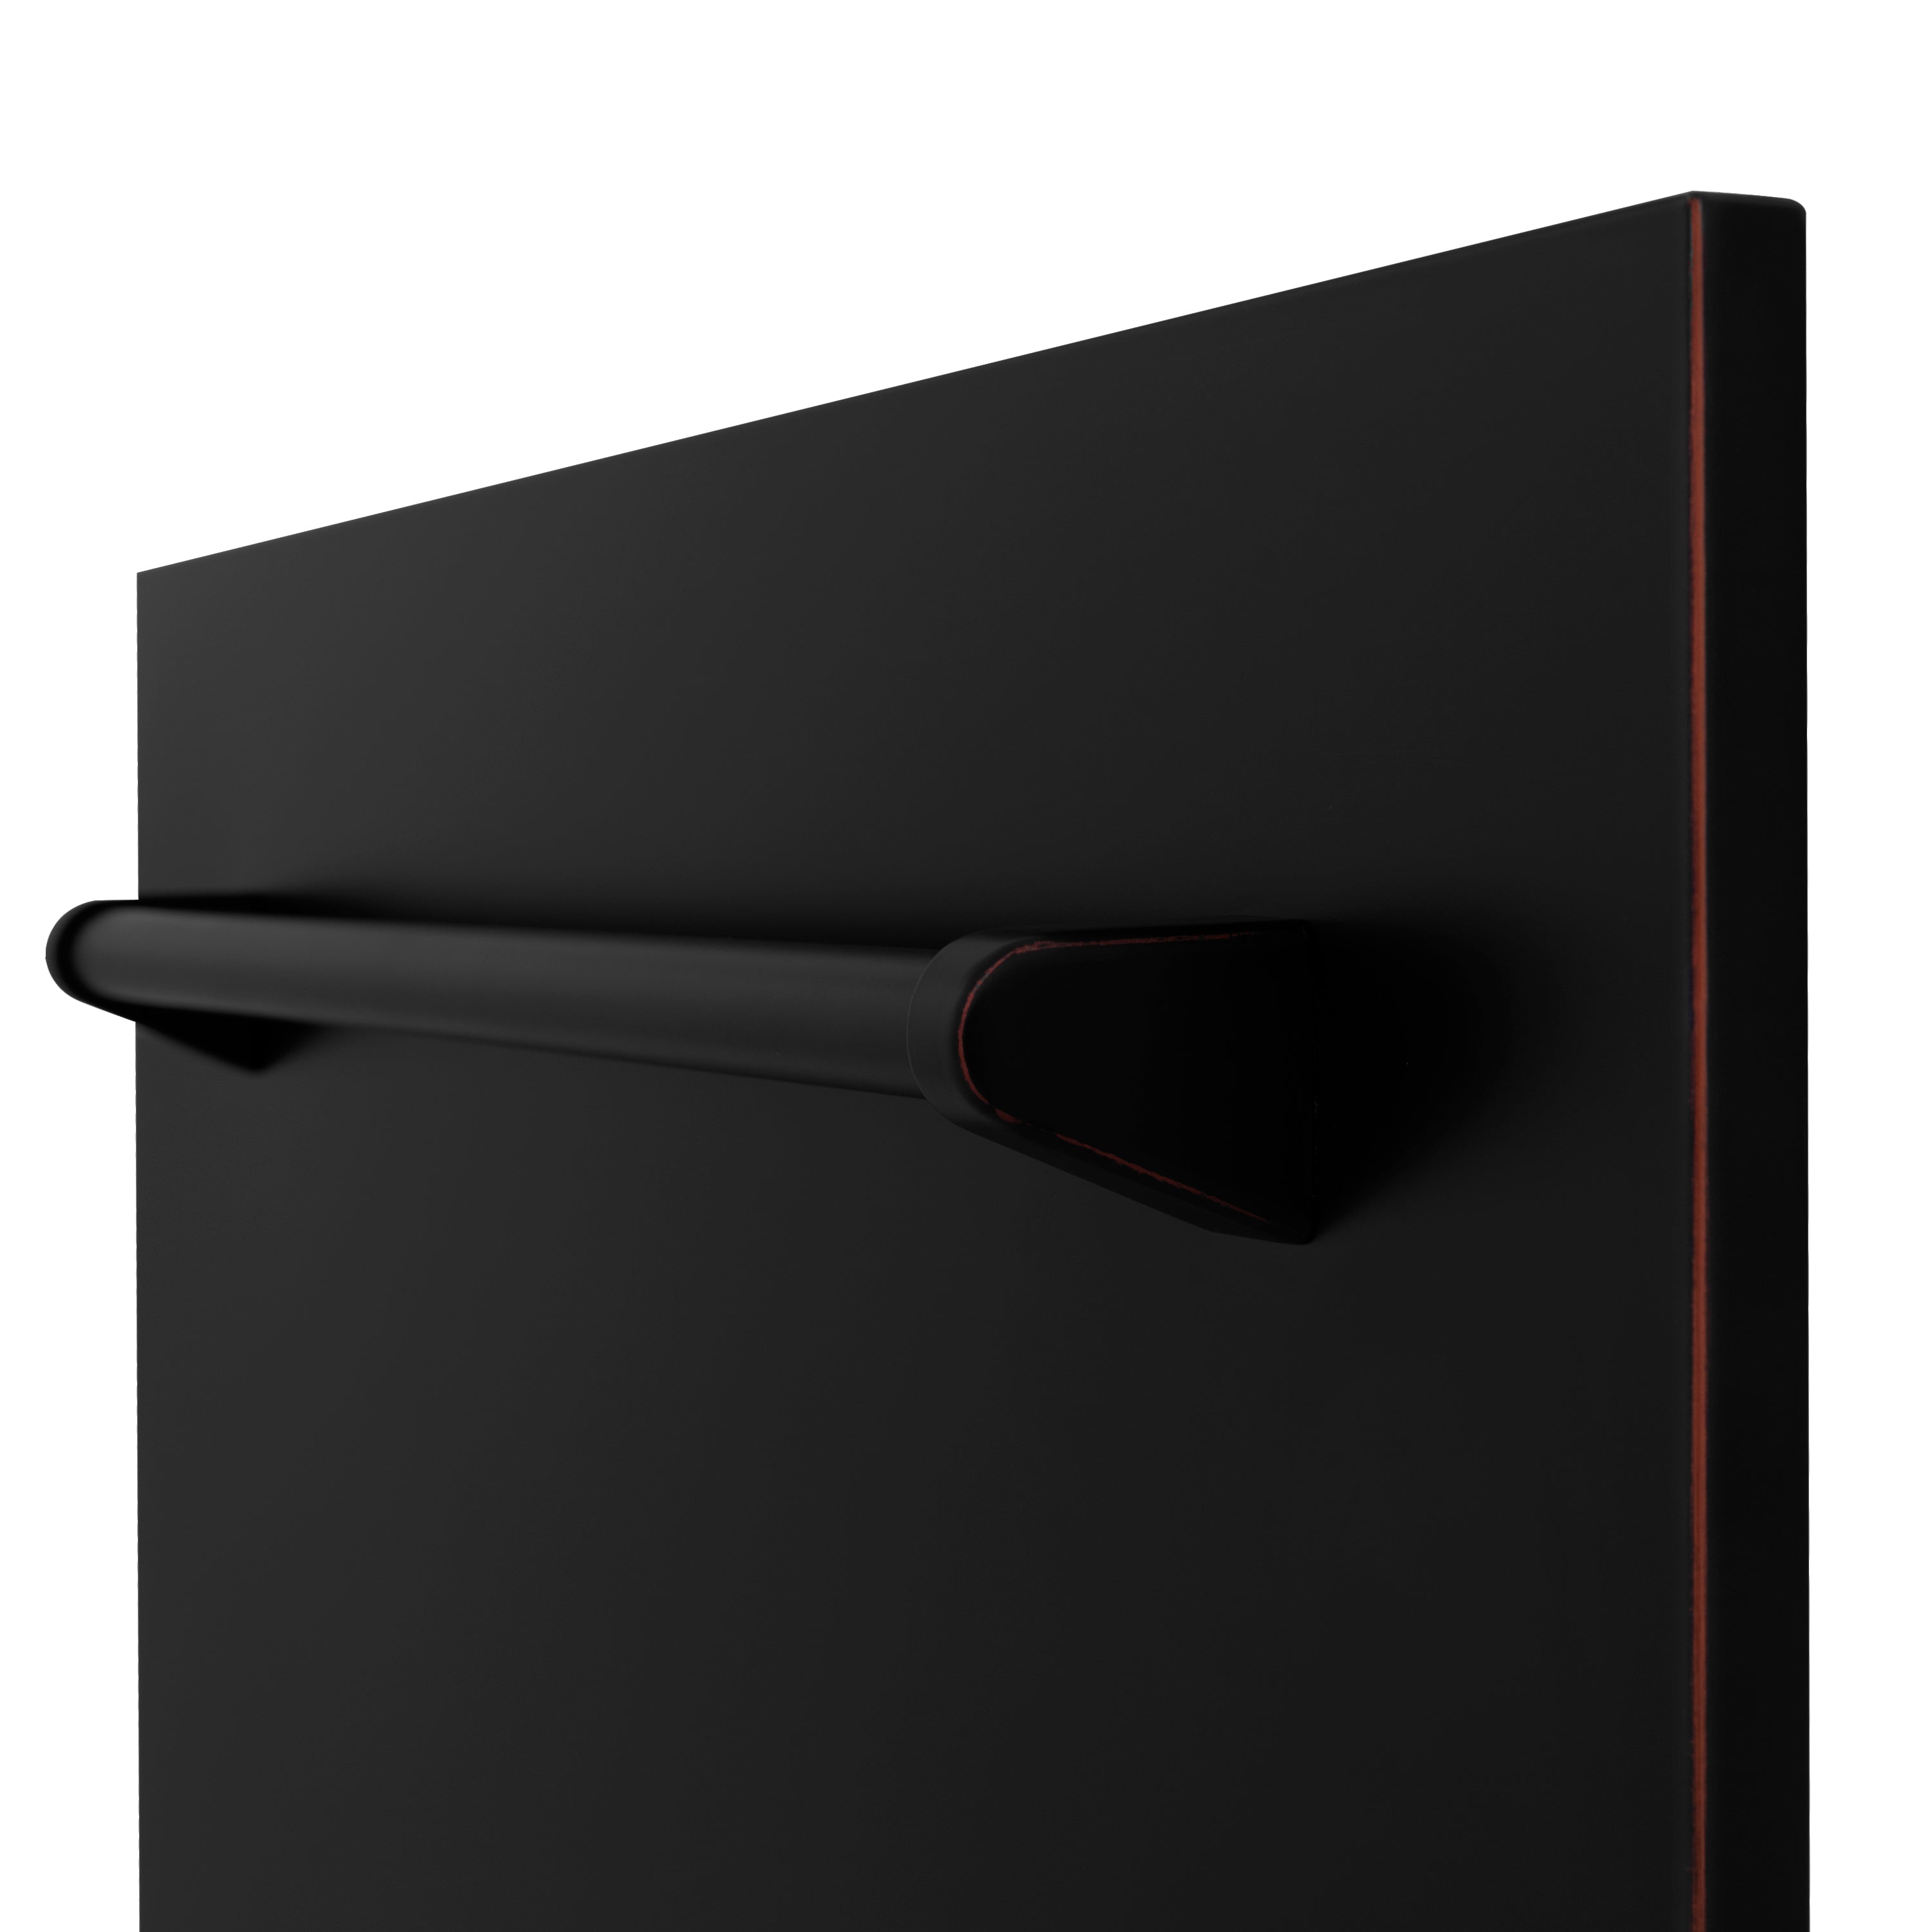 ZLINE 24" Tallac Dishwasher Panel in Oil Rubbed Bronze with Traditional Handle (DPV-ORB-24)